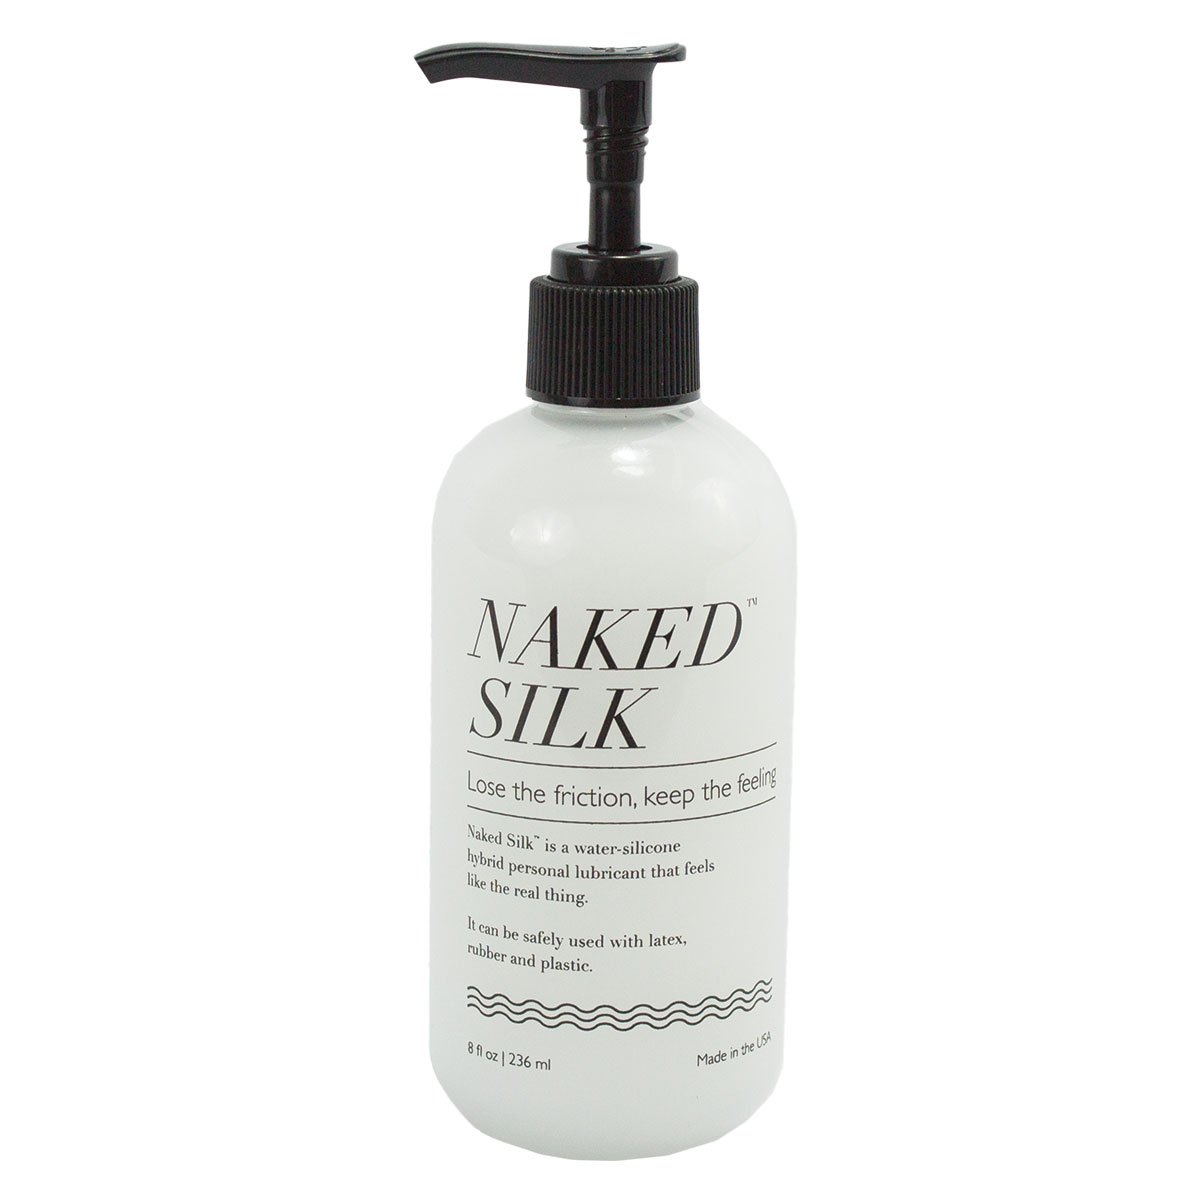 Naked Silk Personal Lubricant - Buy At Luxury Toy X - Free 3-Day Shipping